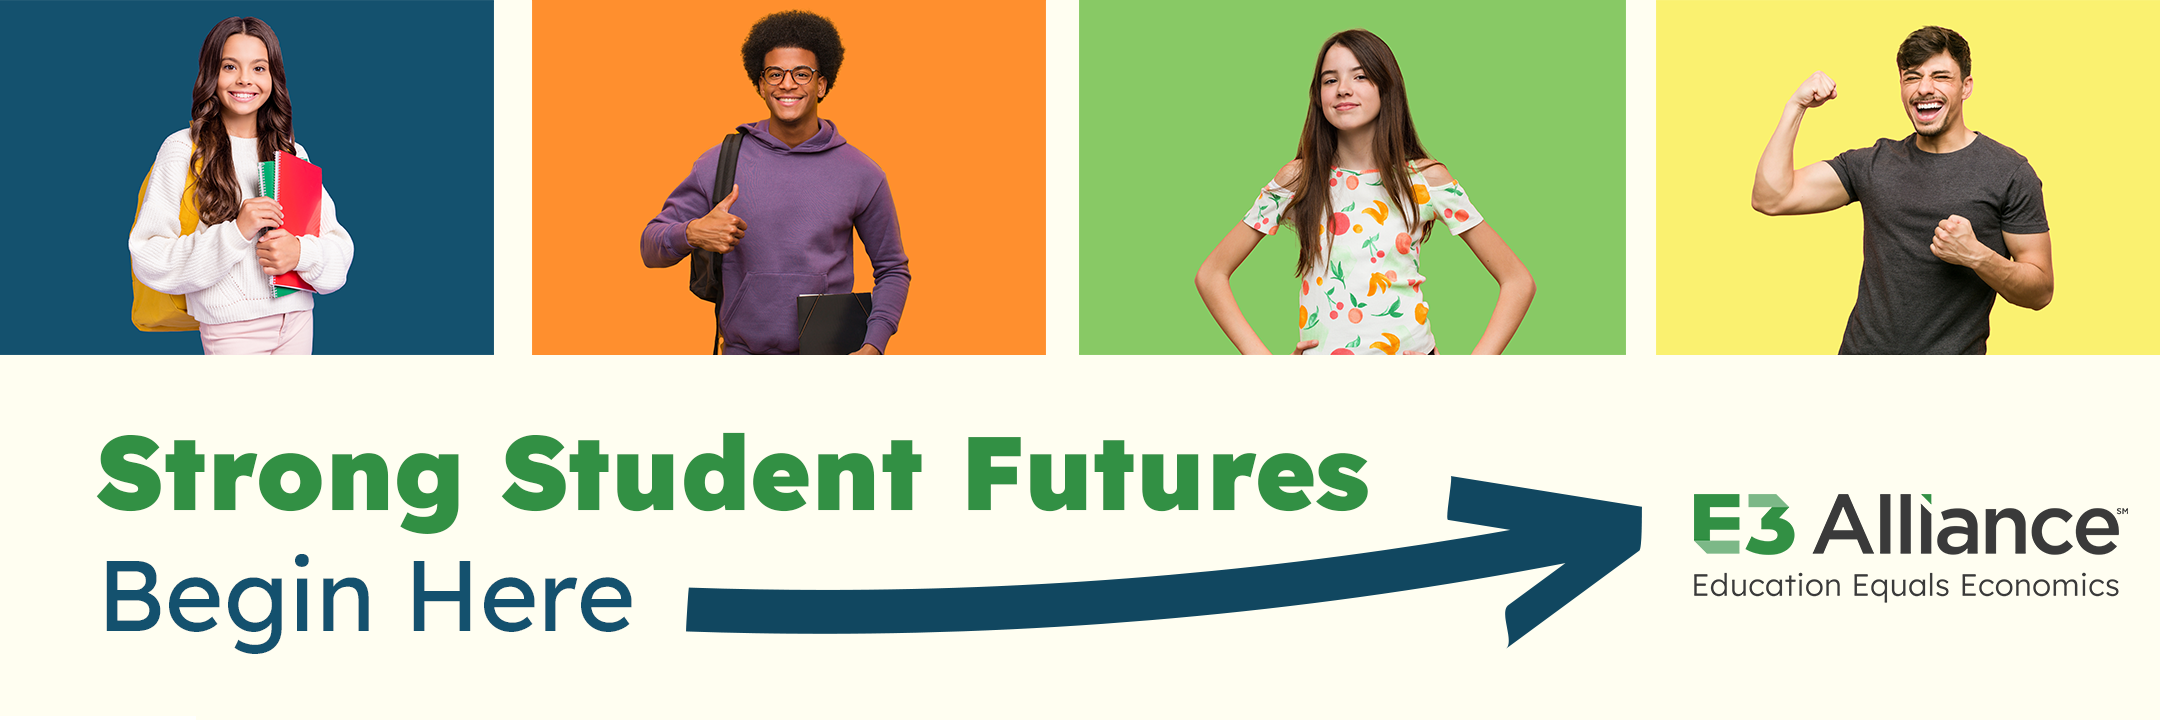 Strong Student Futures Begin Here E3 Alliance